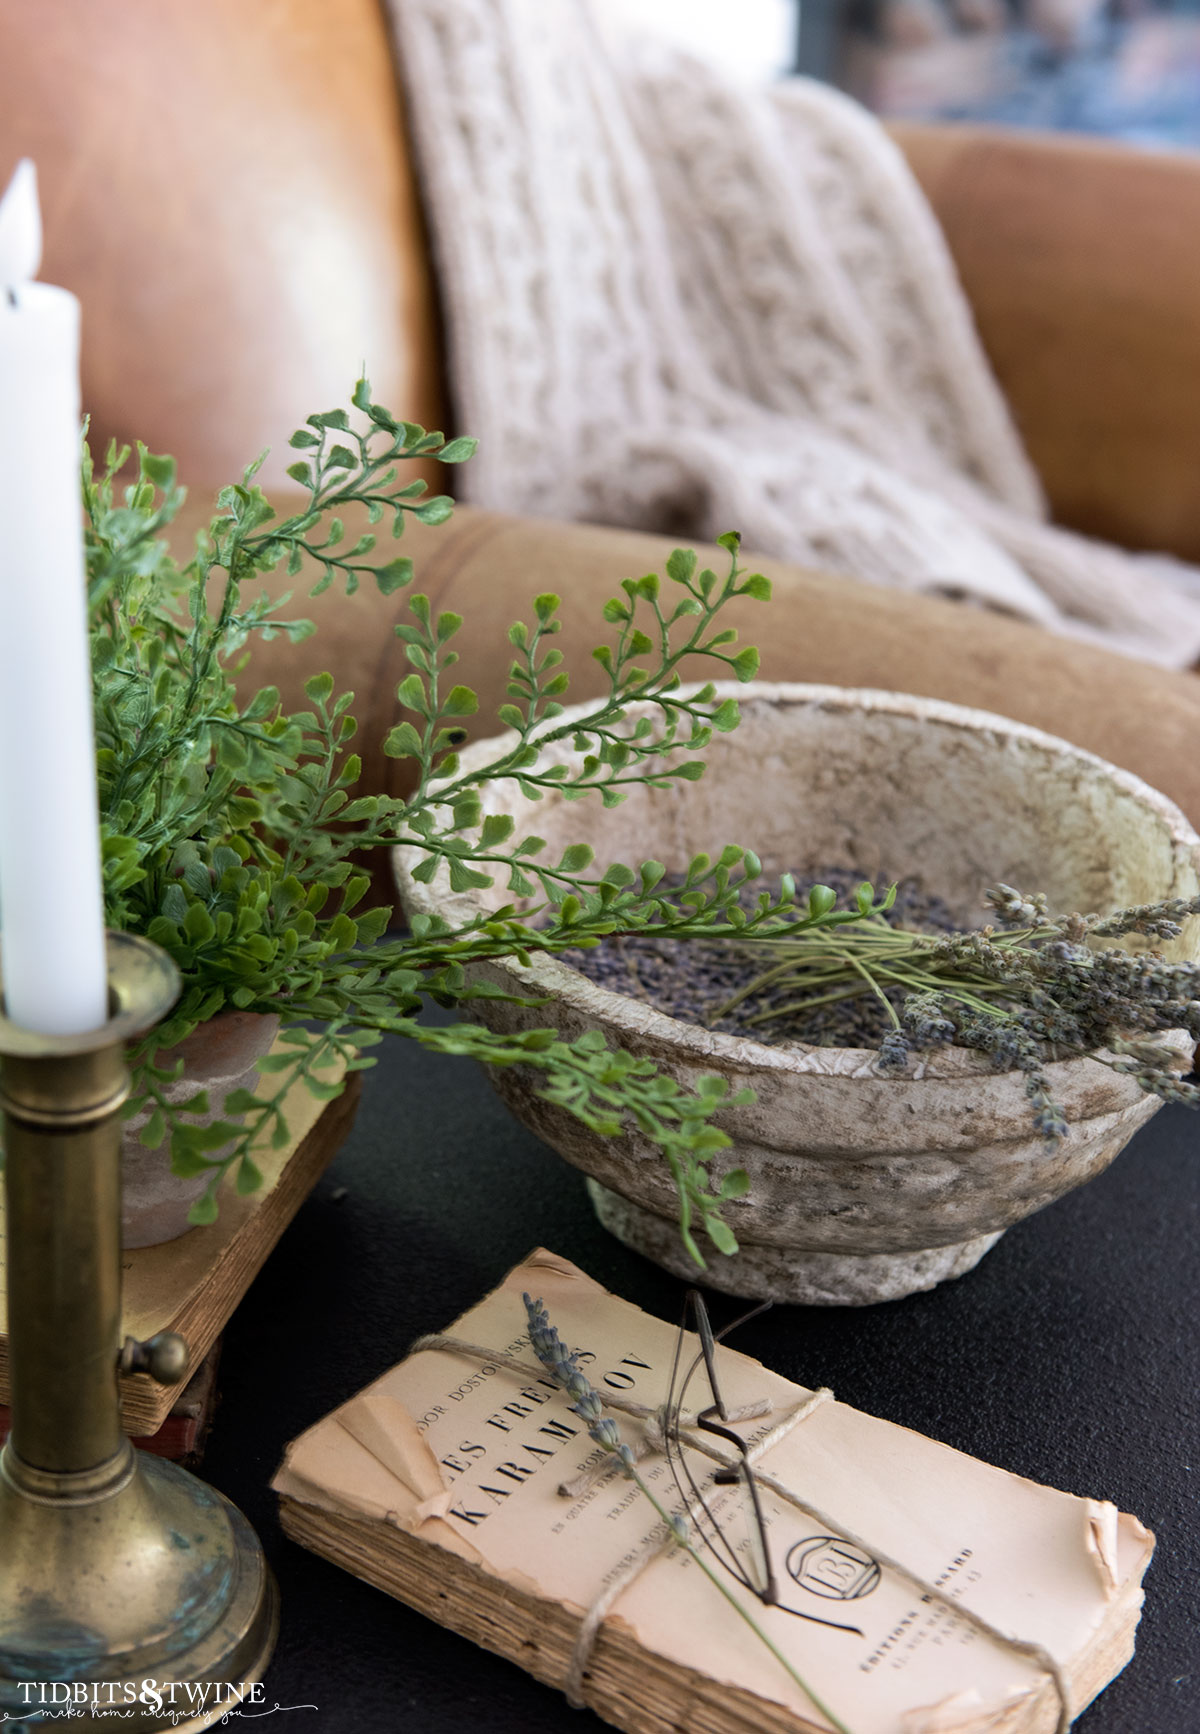 side table vignette with diy paper mache bowl holding lavender stems next to an old book and brass candlestick